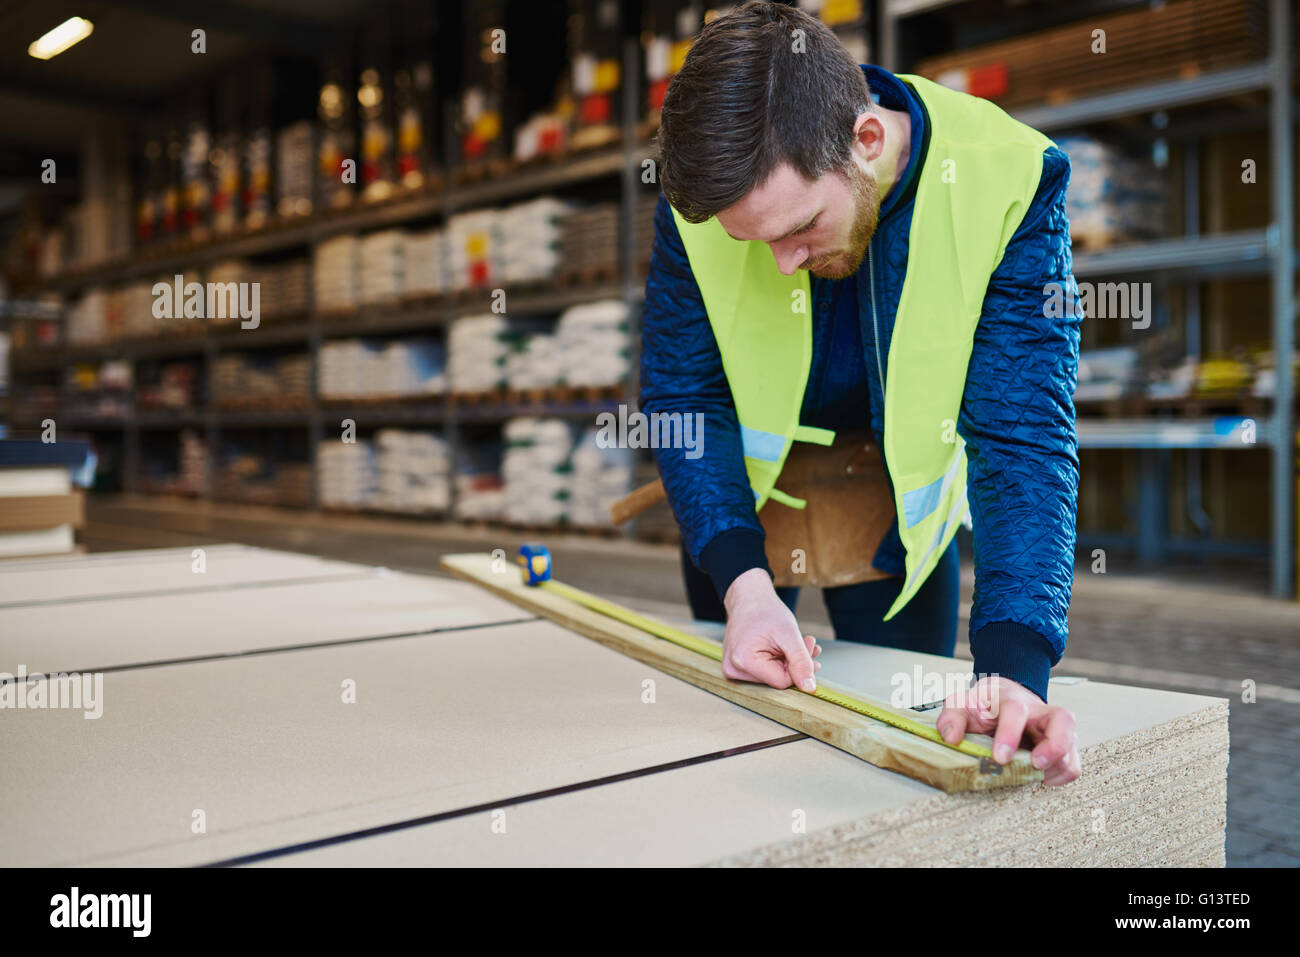 Handyman working in warehouse measuring a piece of wood Stock Photo